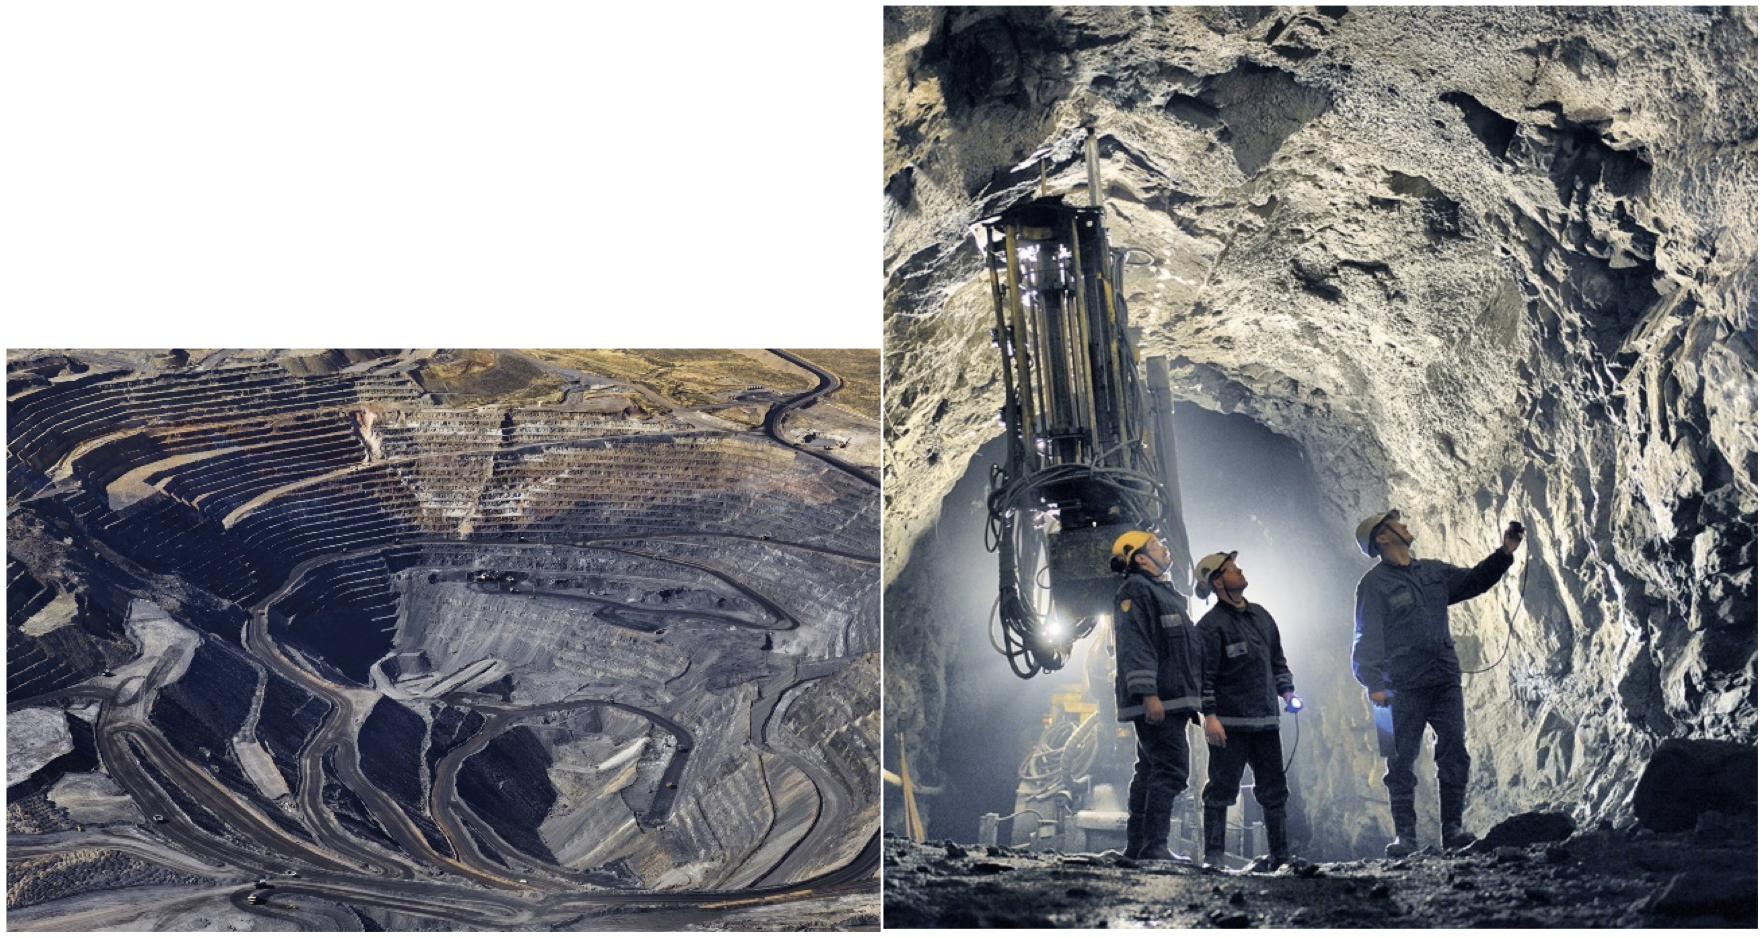 This photo shows the typical sulfide nickel mining operation.